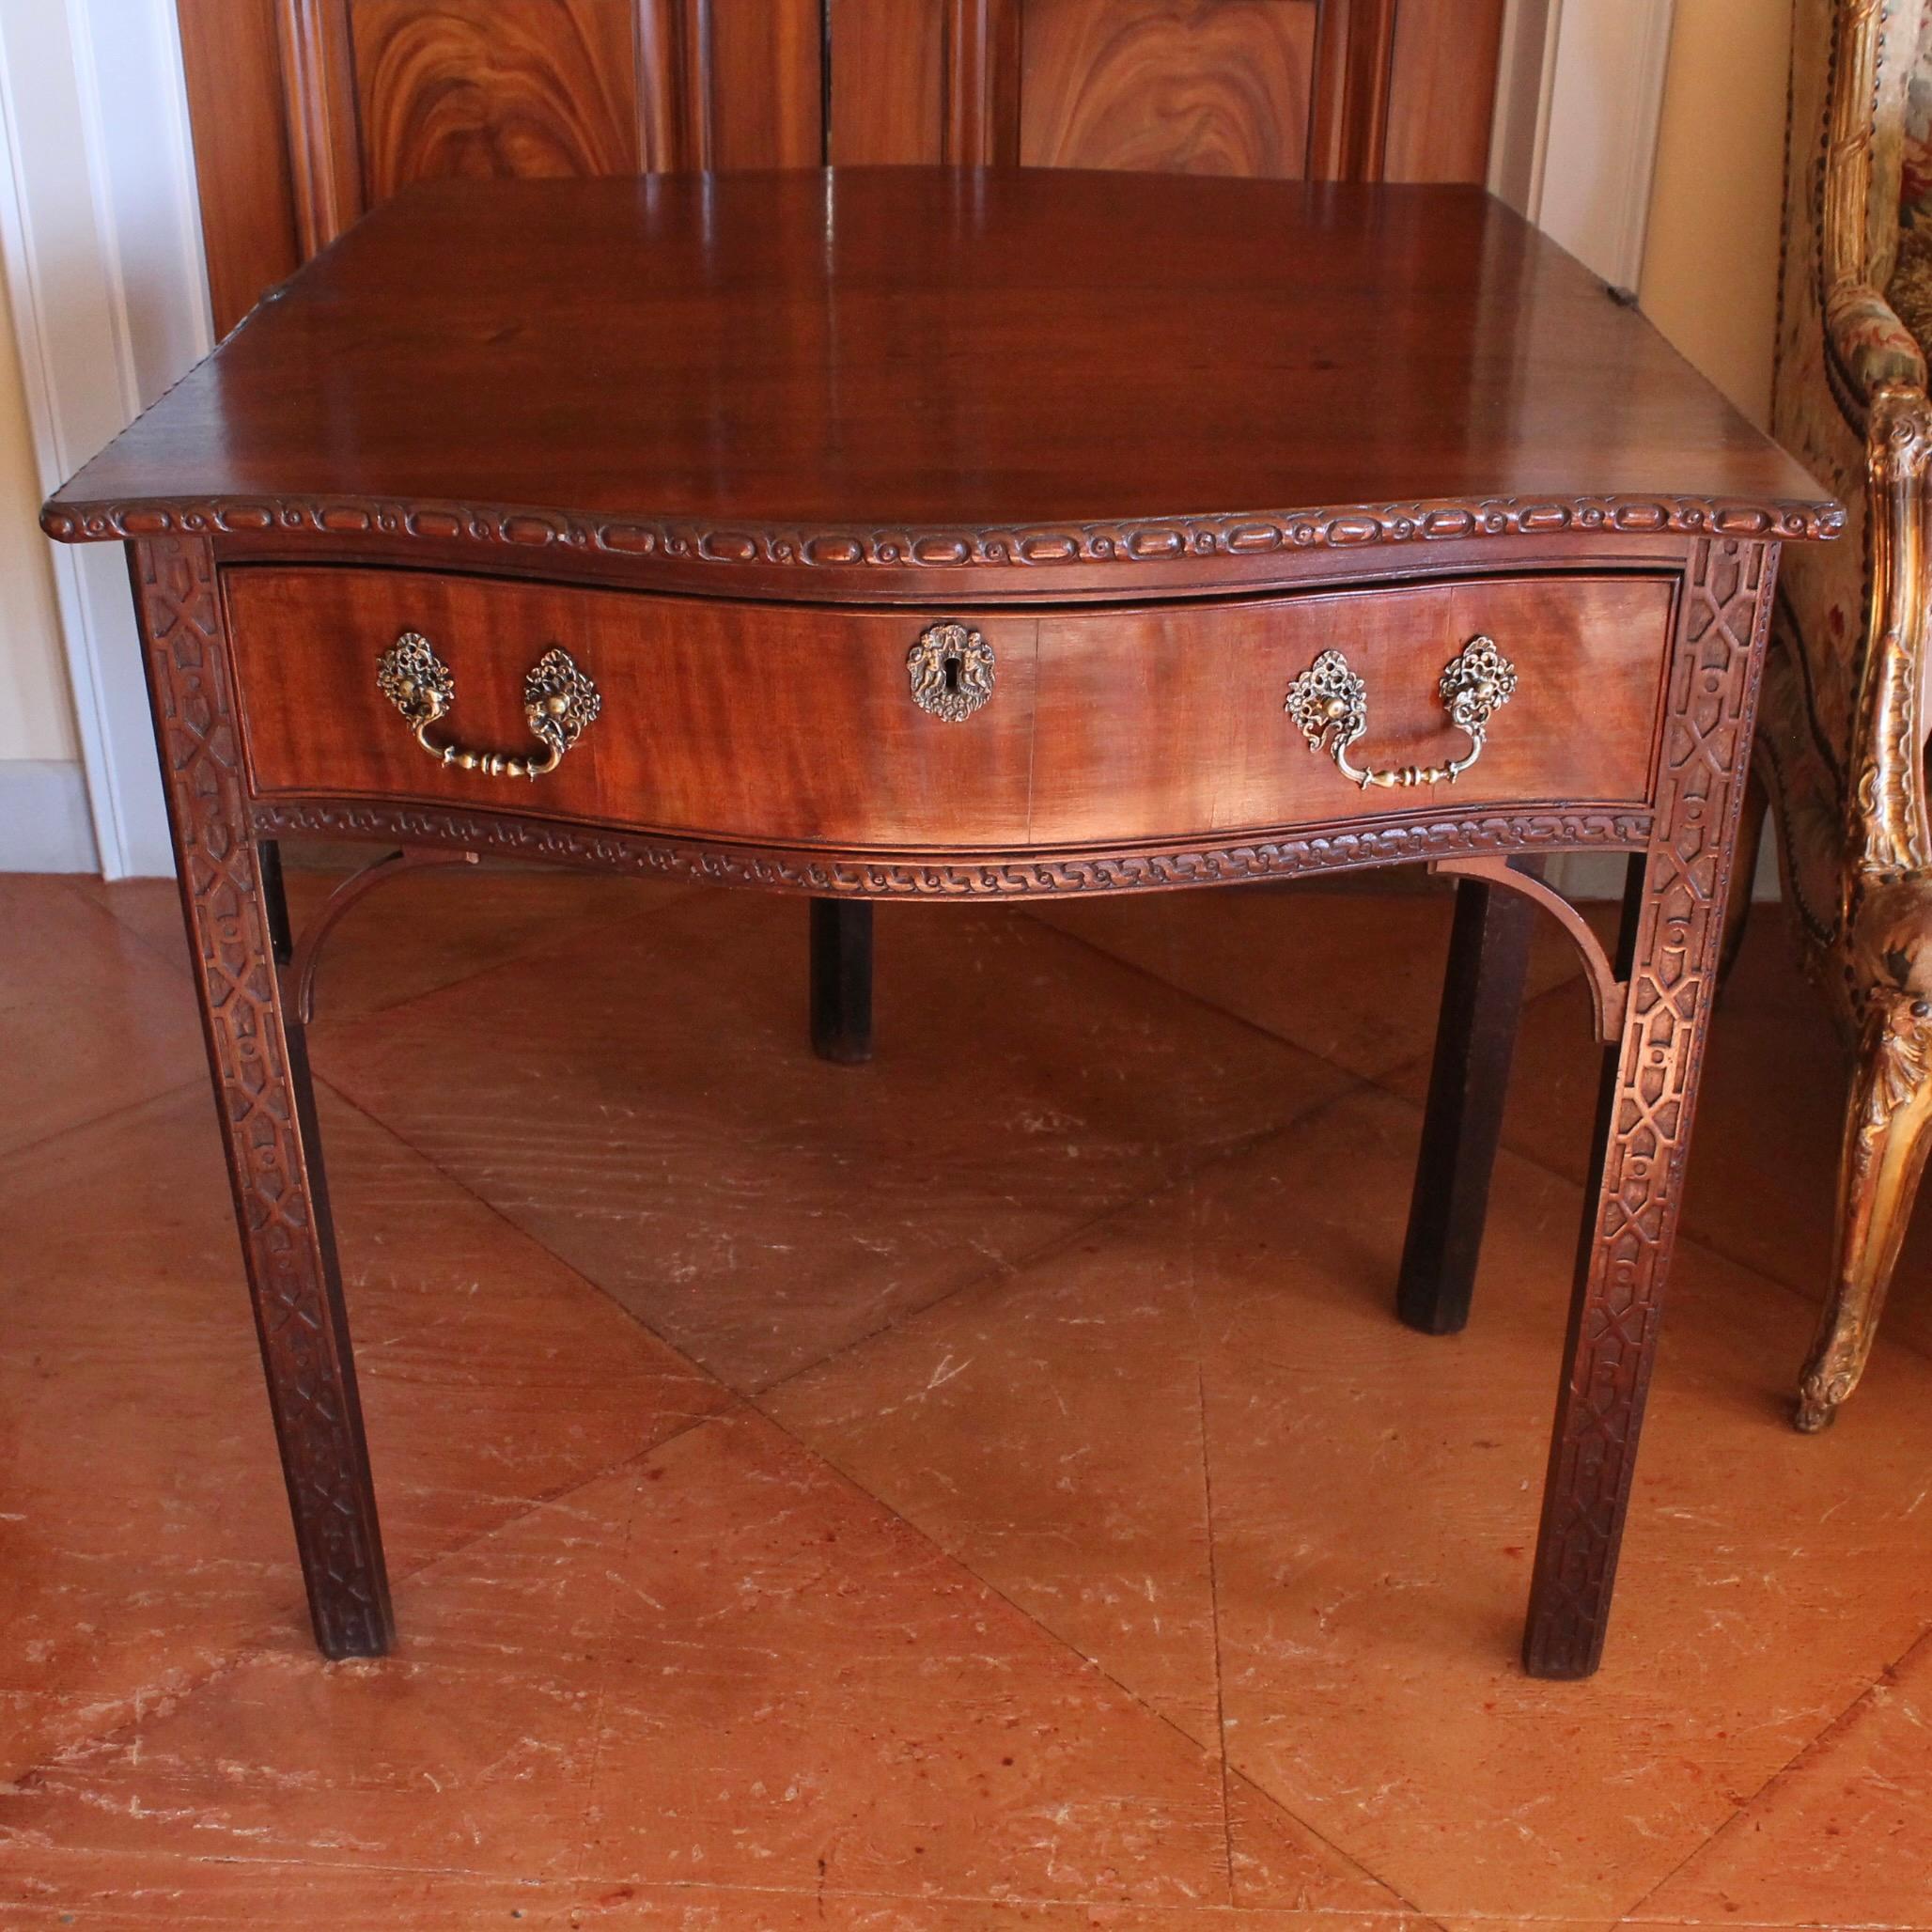 George III Serpentine Front Table With Chinese Chippendale Fret Legs, 18th c. For Sale 3